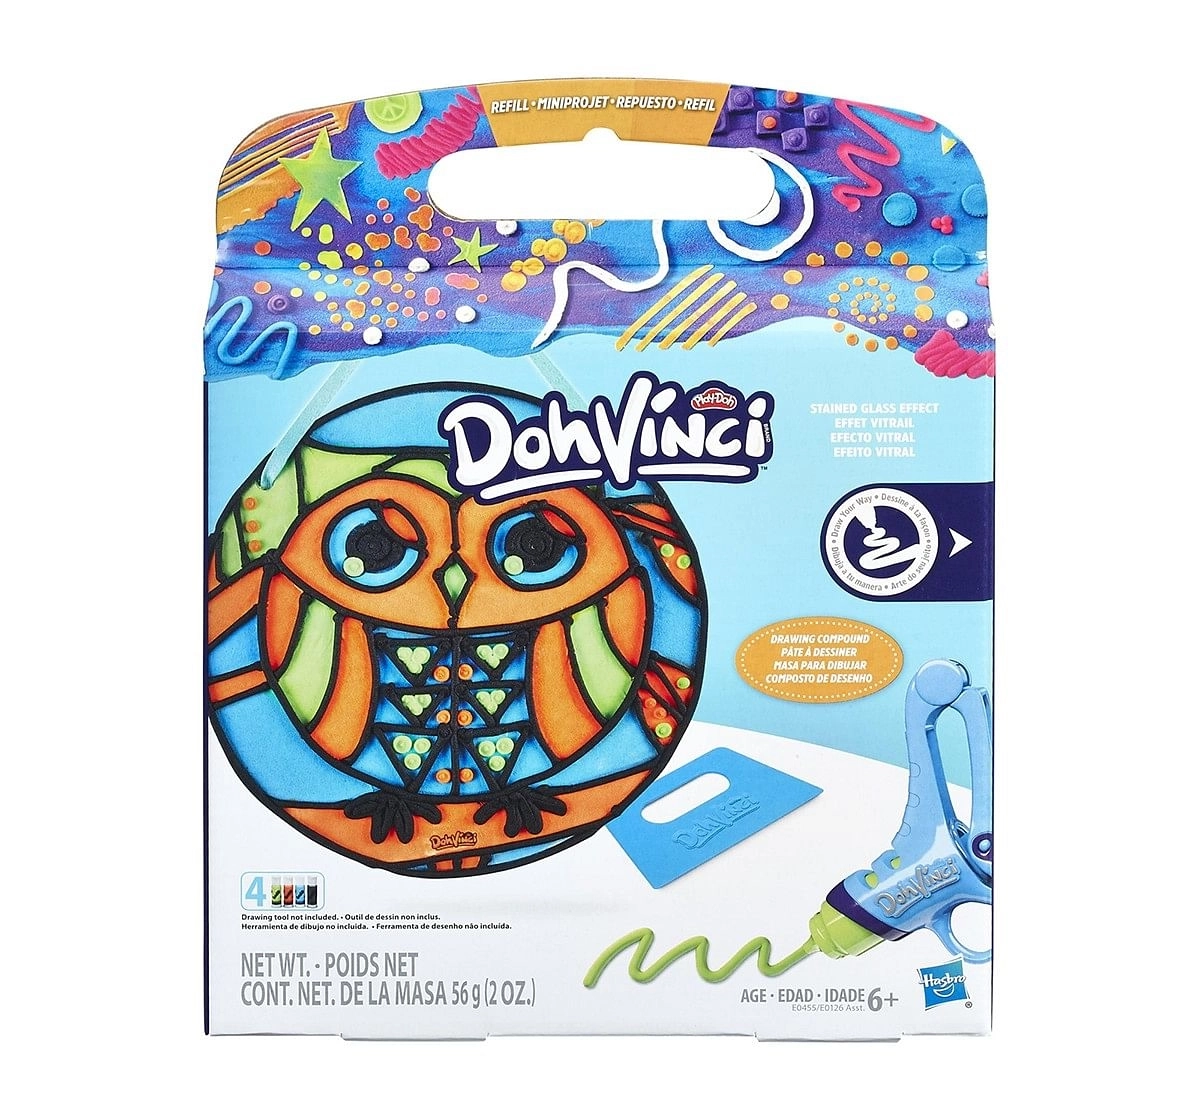 Play-Doh Dohvinci Stained Glass Effect Refill Art Set Assorted Clay & Dough for Kids age 3Y+ 